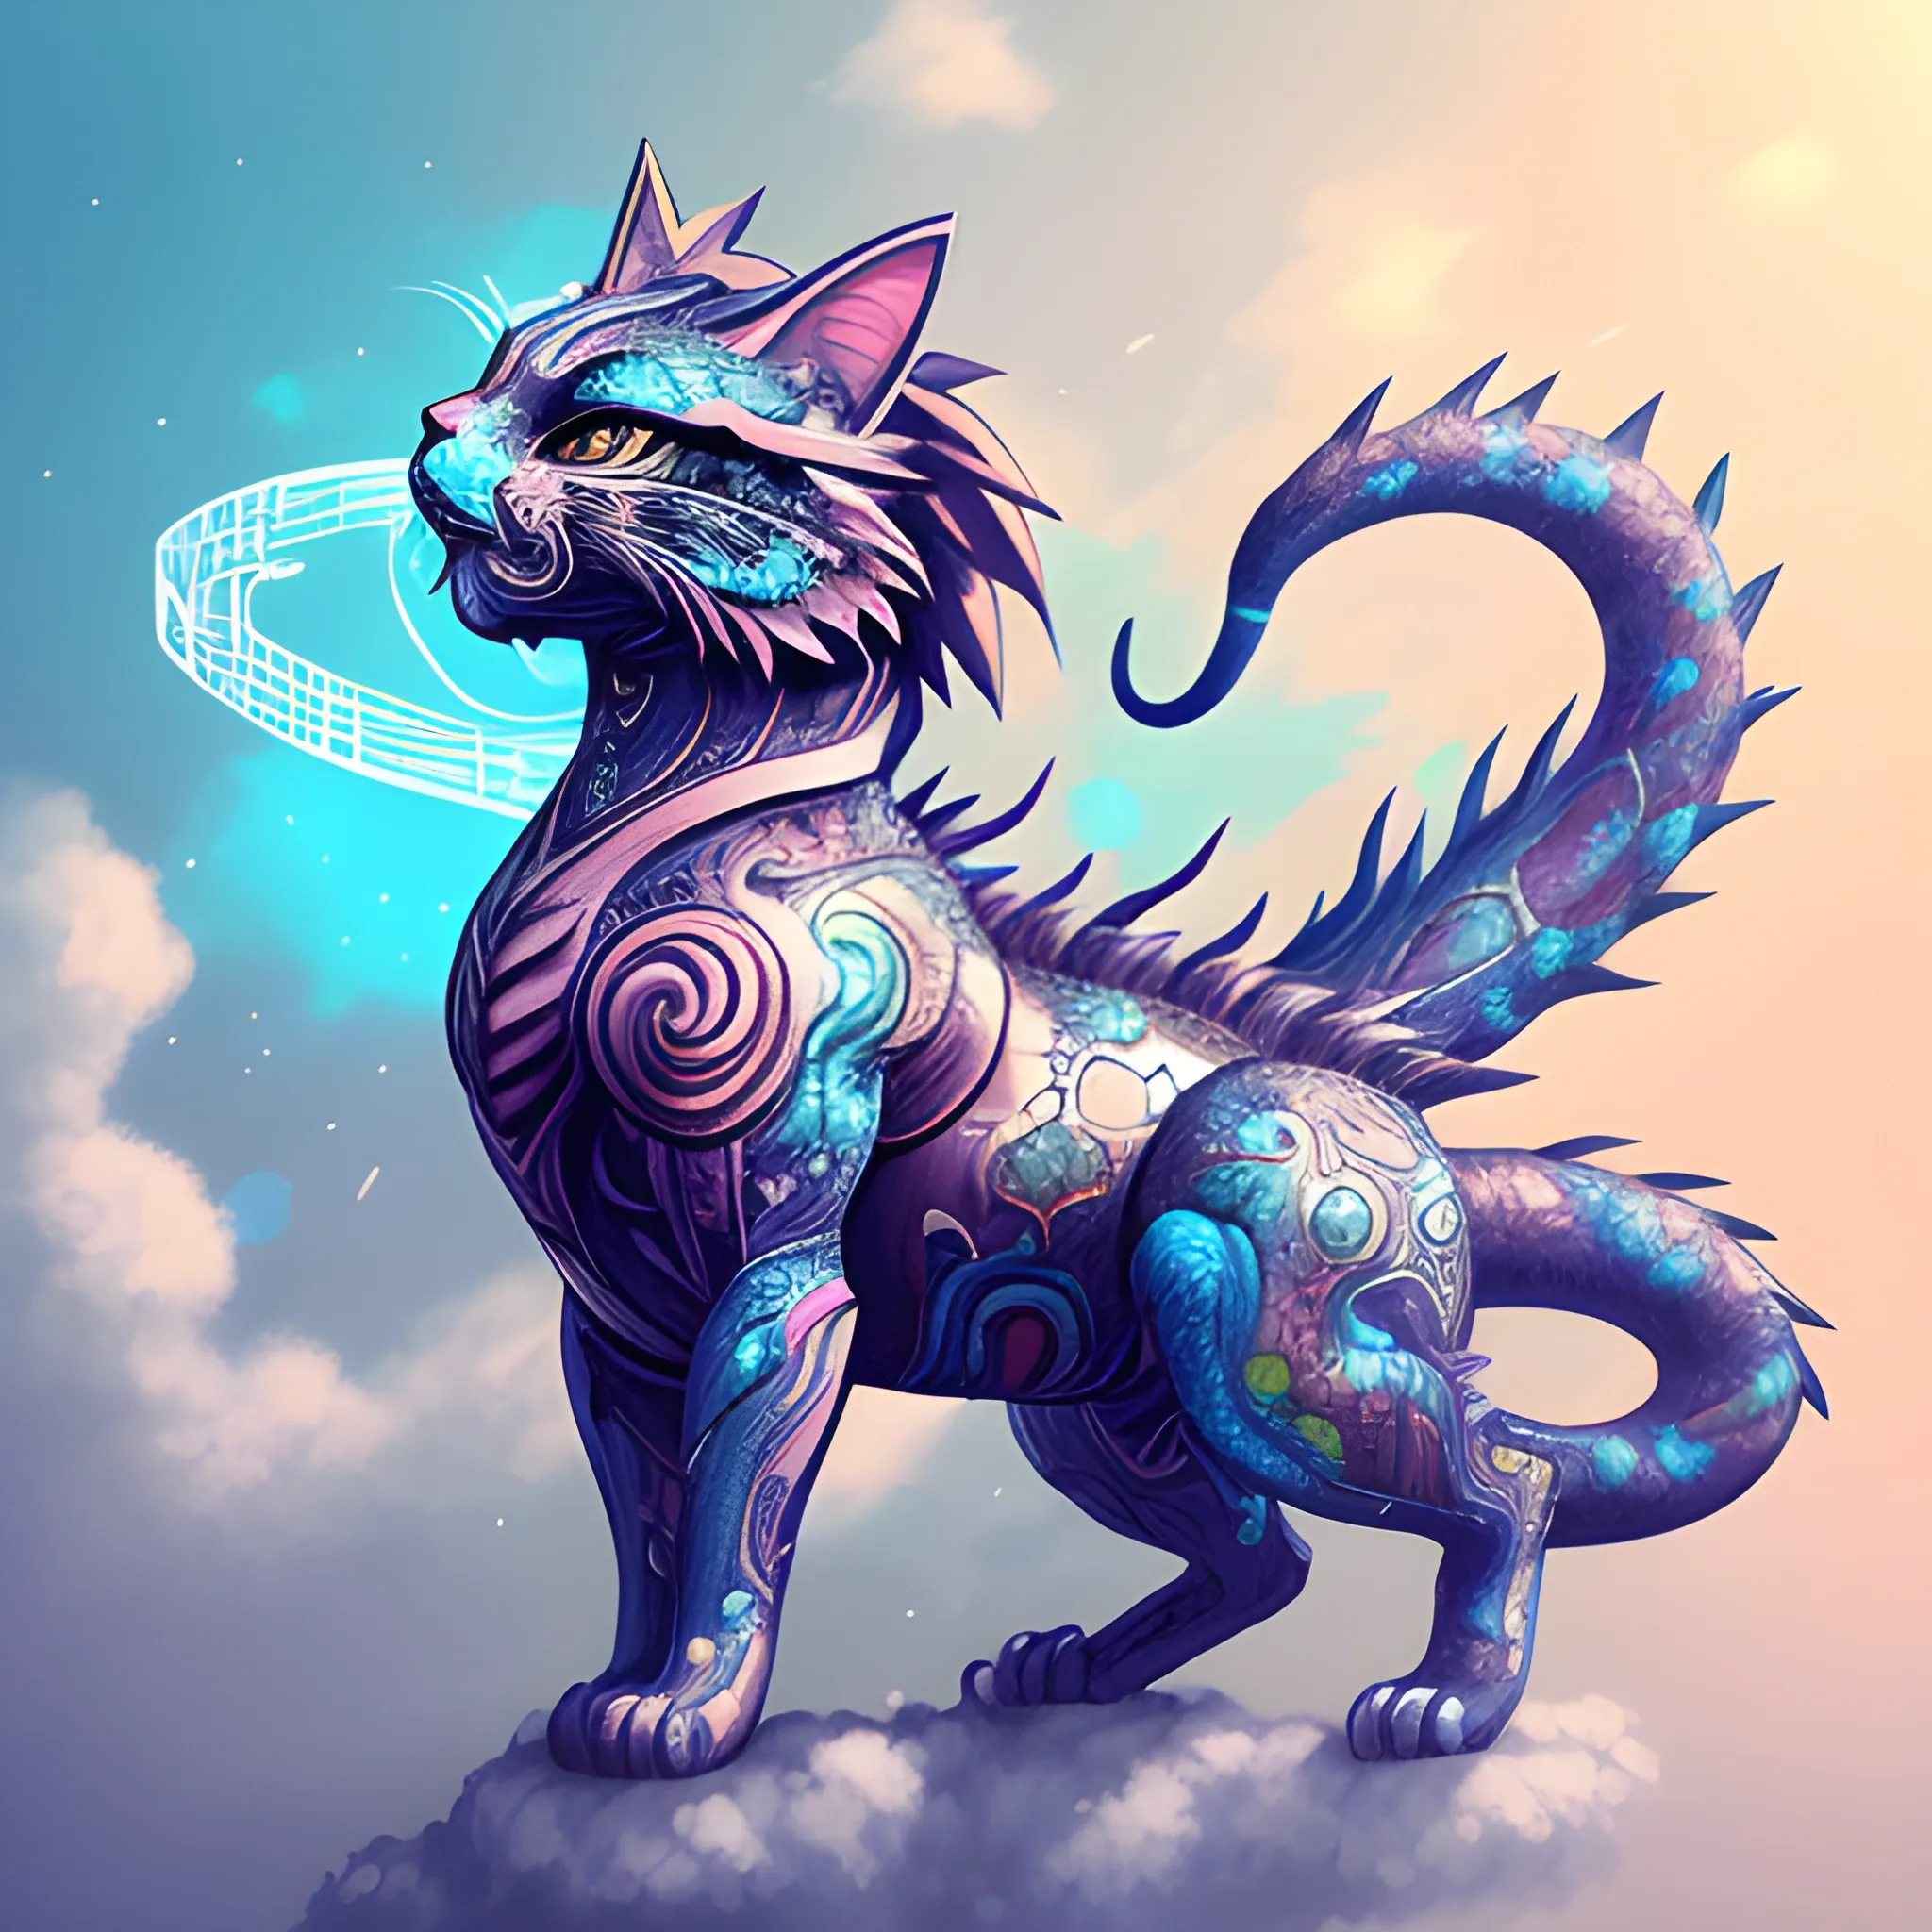 AI-powered cat hybrid celebrating New Year in the clouds, ancient AI technology, anime-style illustration, inspired by Yoji Shinkawa, vibrant and colorful, majestic dragon-cat hybrid, mystical clouds, AI-powered celebration, ancient aesthetics, high quality, vibrant colors, anime, ancient, Yoji Shinkawa, mystical clouds, dragon-cat hybrid, New Year celebration, AI technology, vibrant, majestic, ancient aesthetics, anime-style illustration, high quality, Pencil Sketch, Oil Painting, 3D